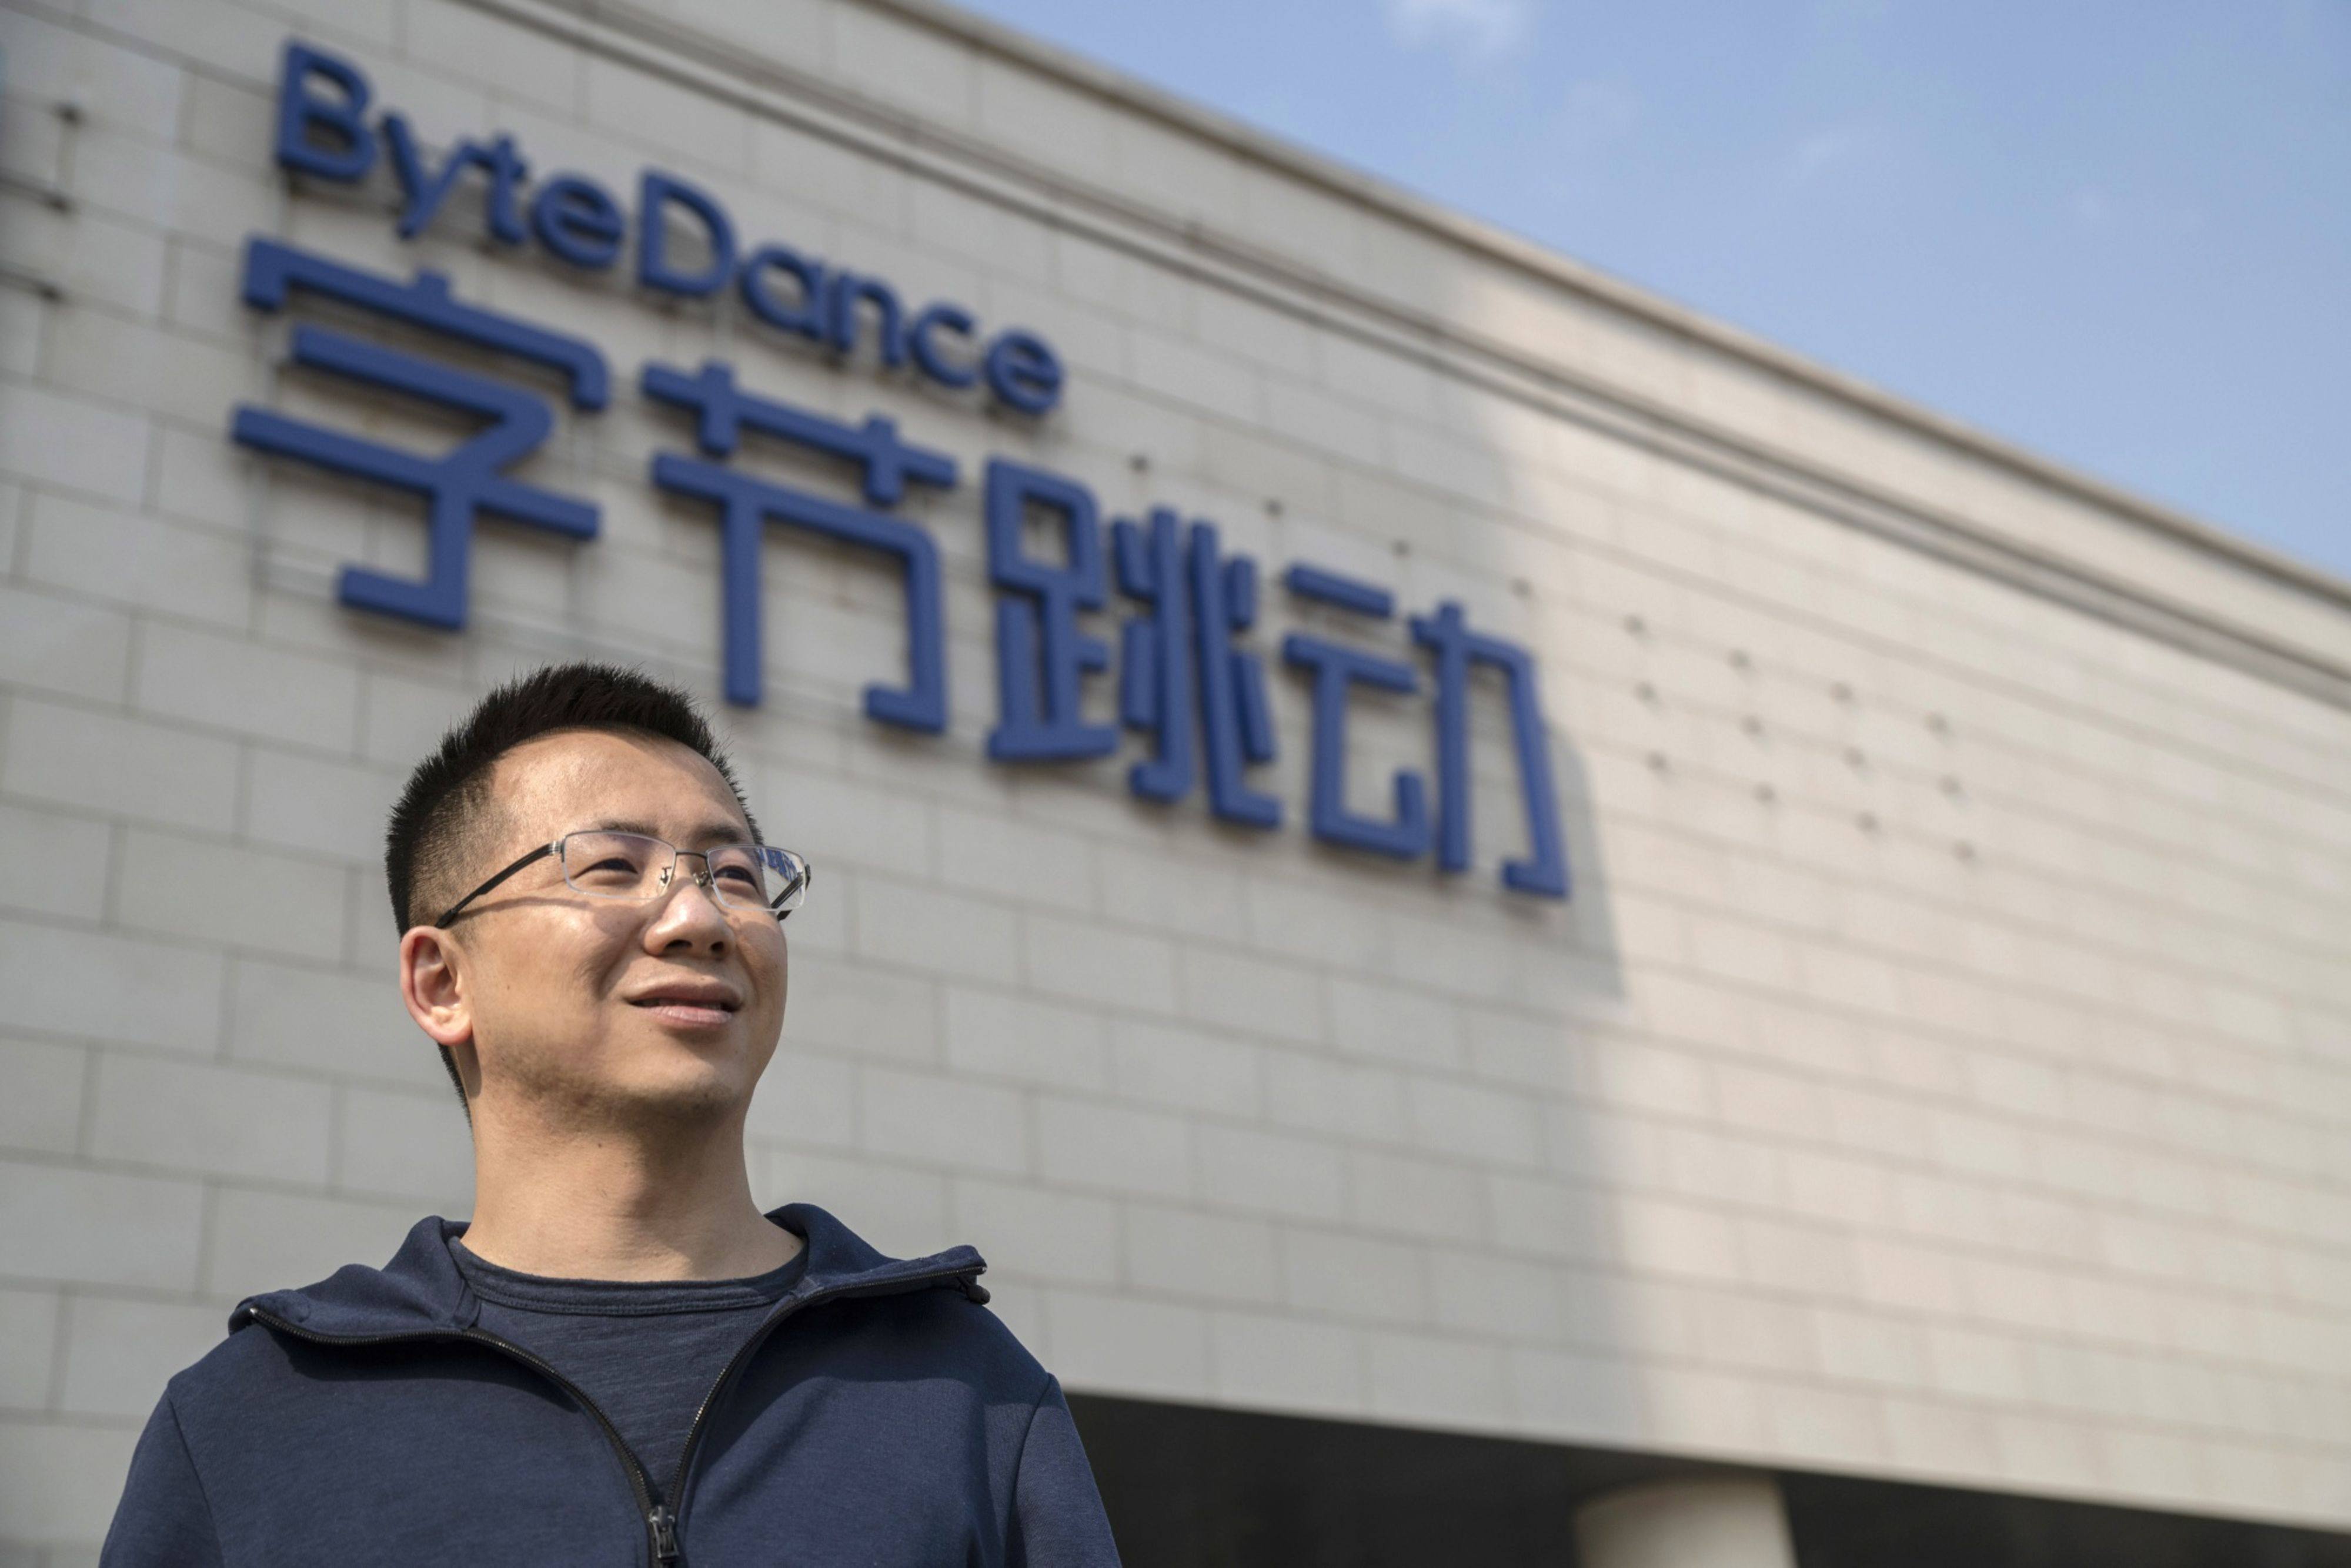 Zhang Yiming, founder of Bytedance, poses for a photograph in Beijing, China, April 11, 2019. Photo: Bloomberg